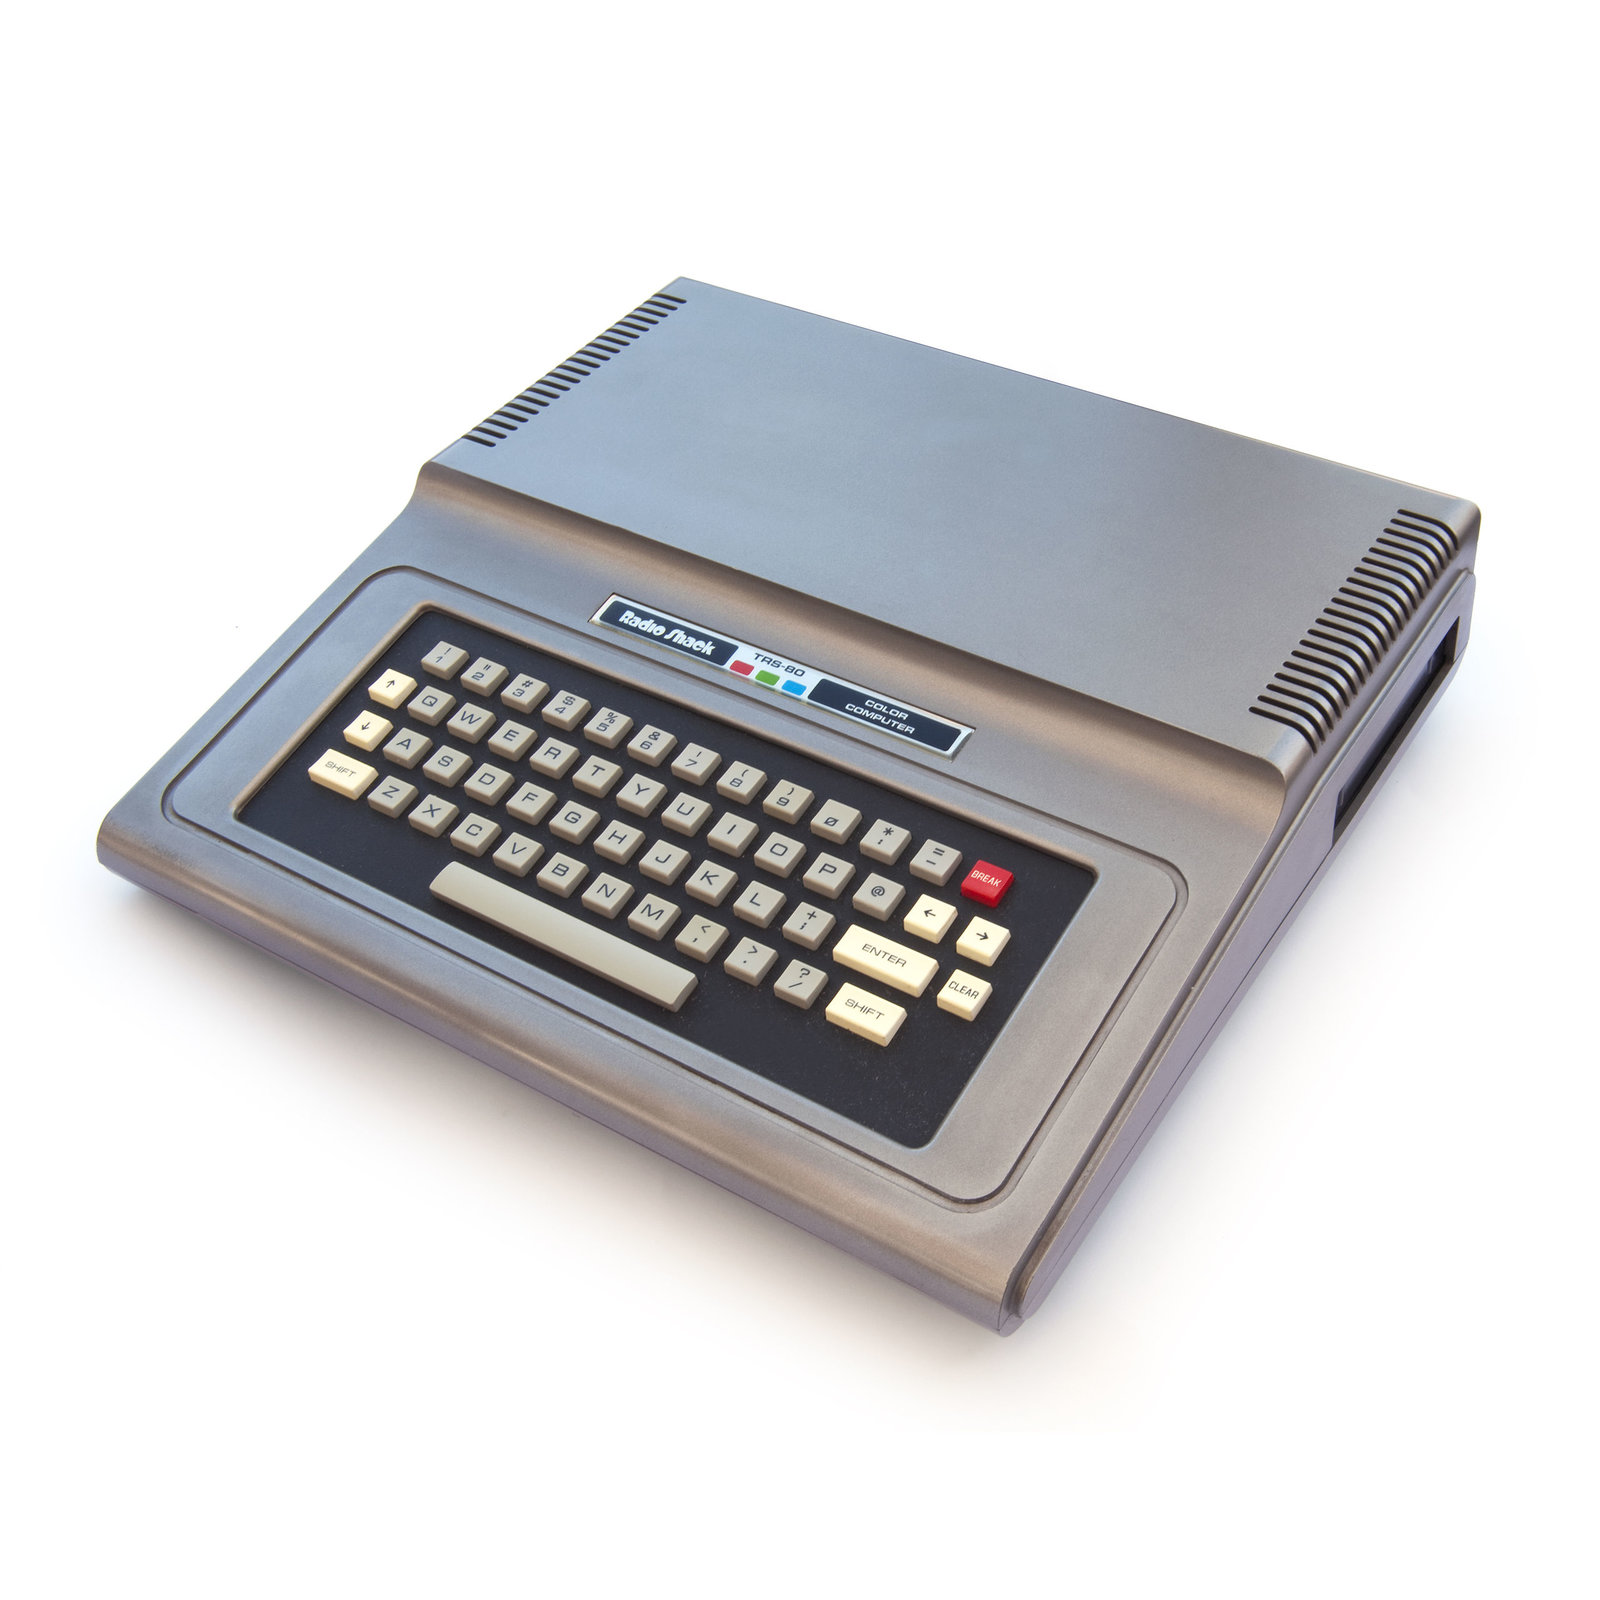 2560px-TRS-80_Color_Computer_1_front_right.jpg